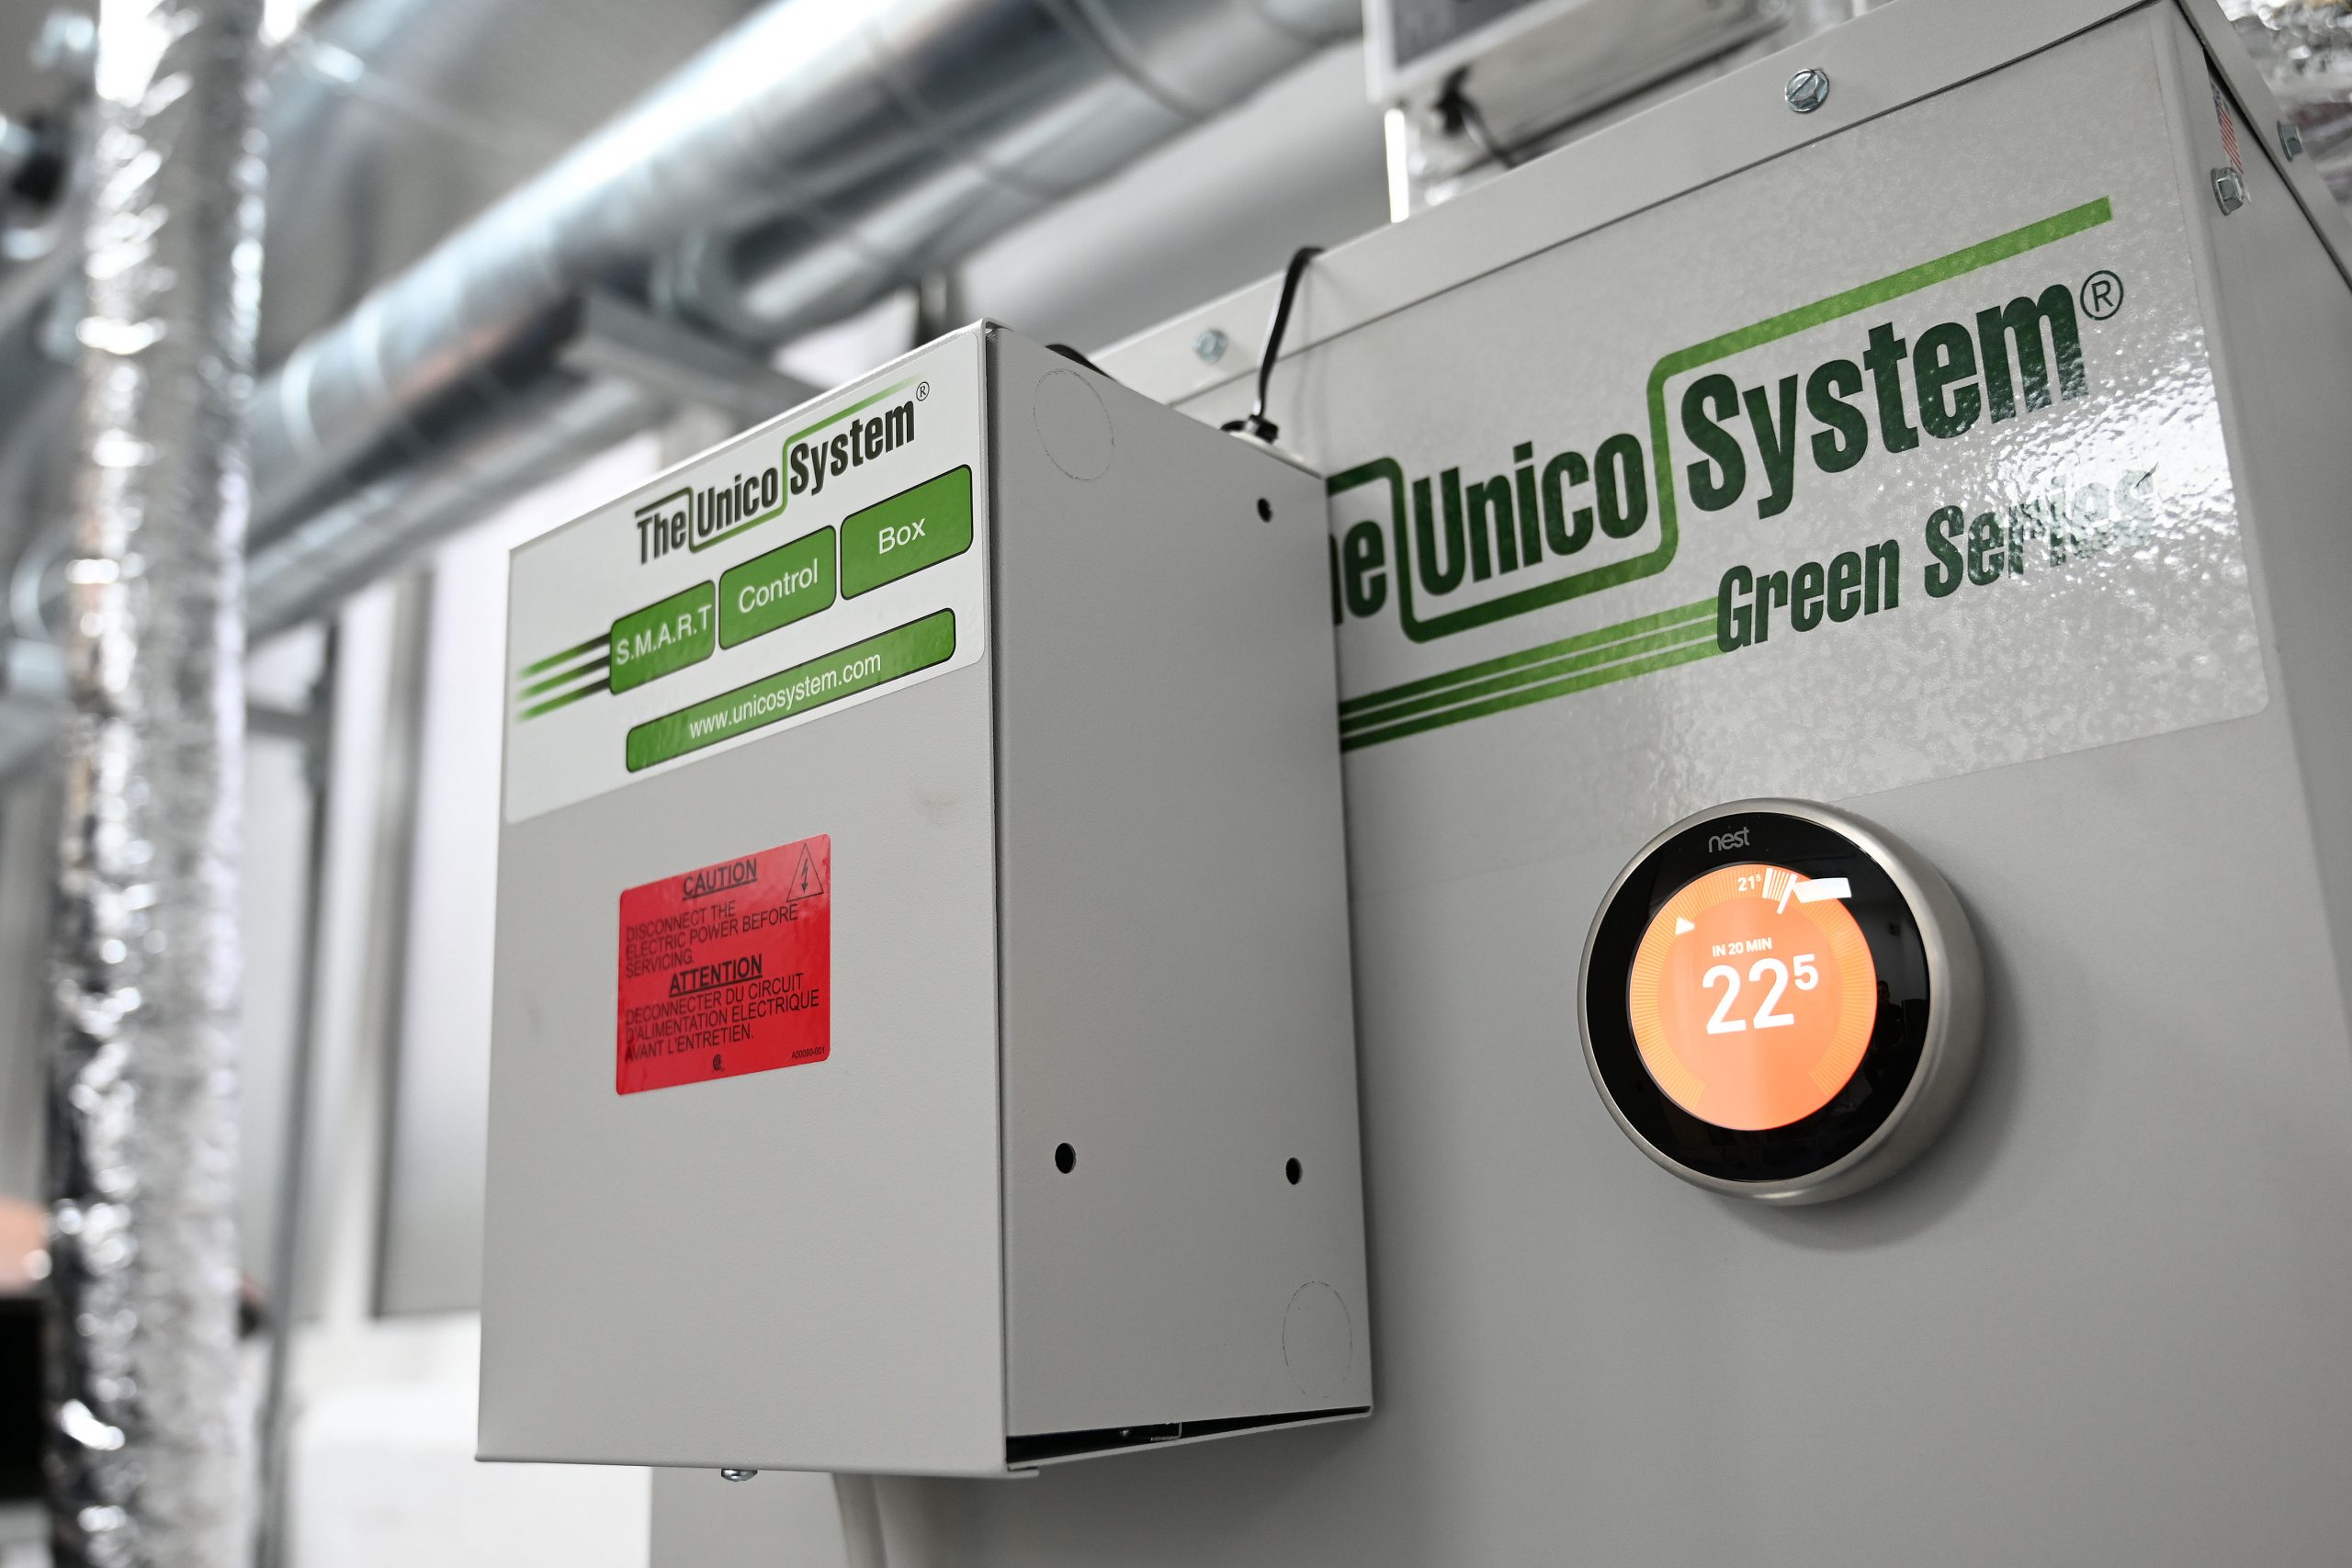 New small duct heating and cooling system set to tackle rising temperatures in UK homes @TheUnicoSystem